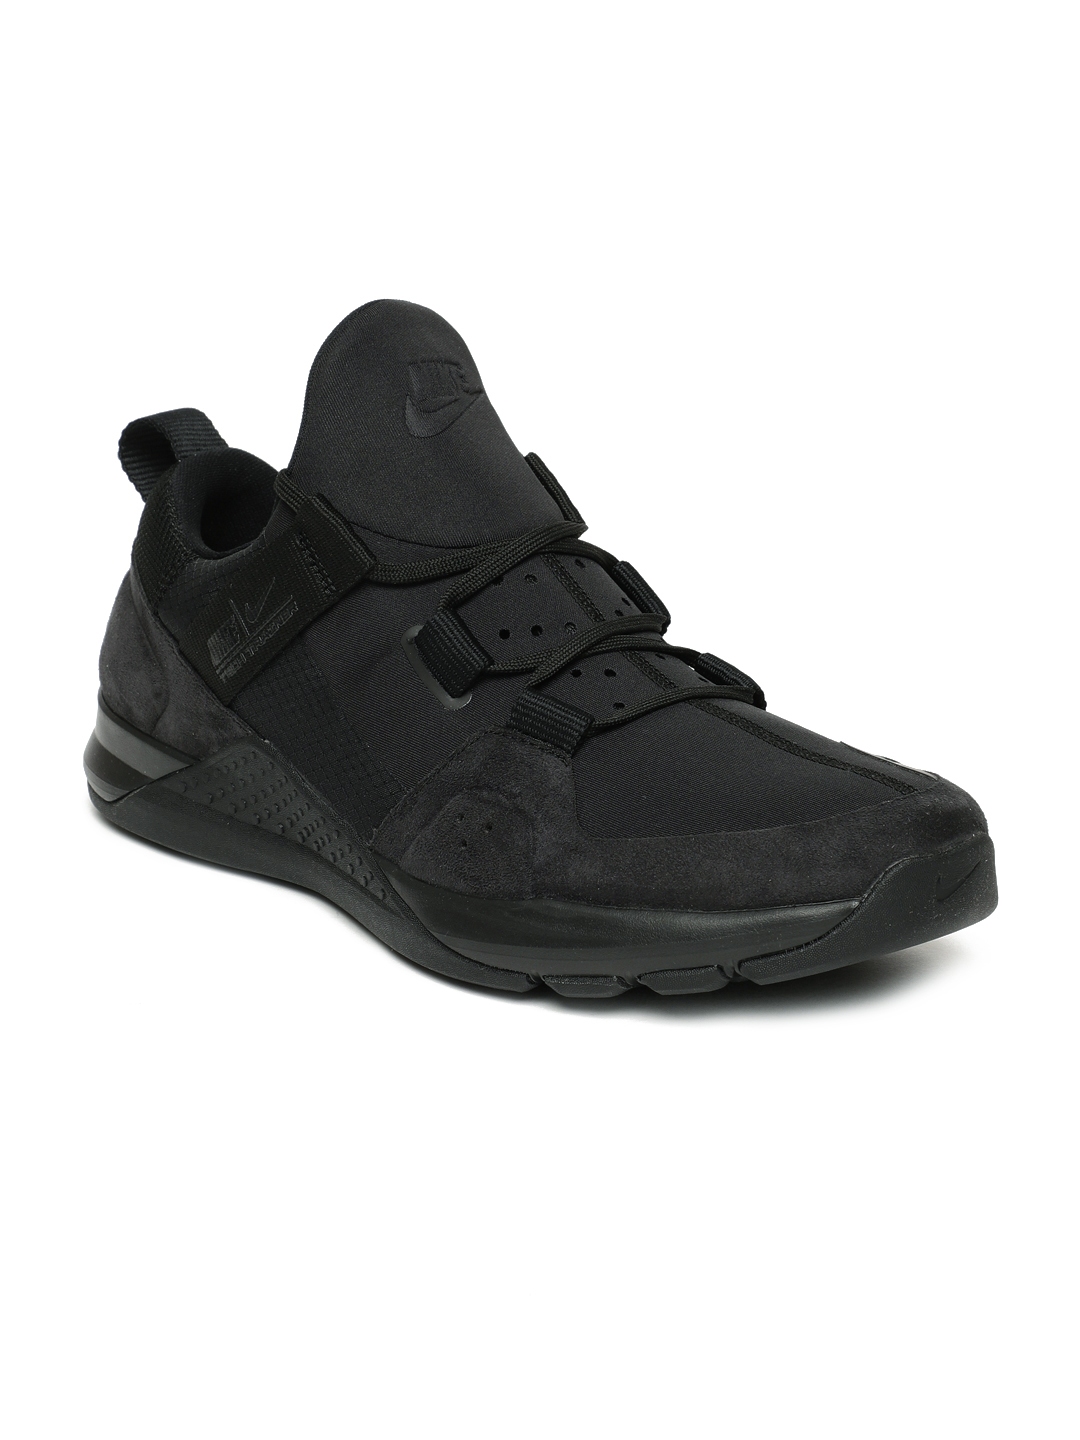 nike tech trainer gym shoes